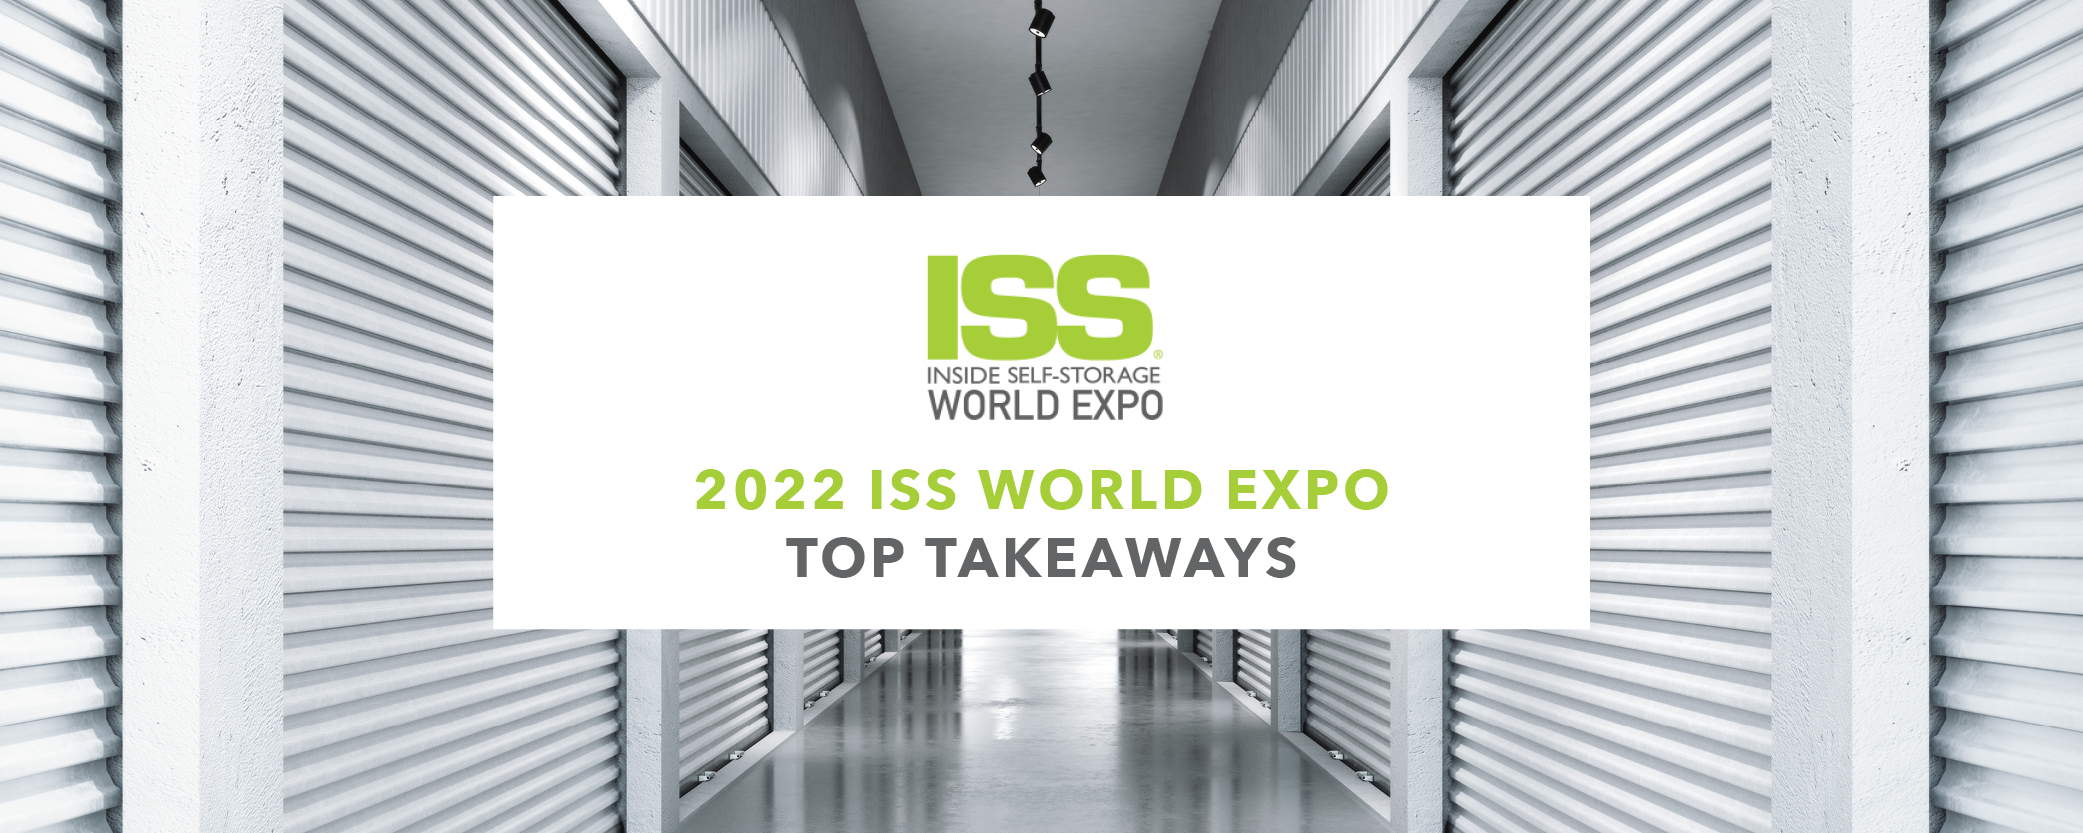 Top takeaways: iss world expo 2022